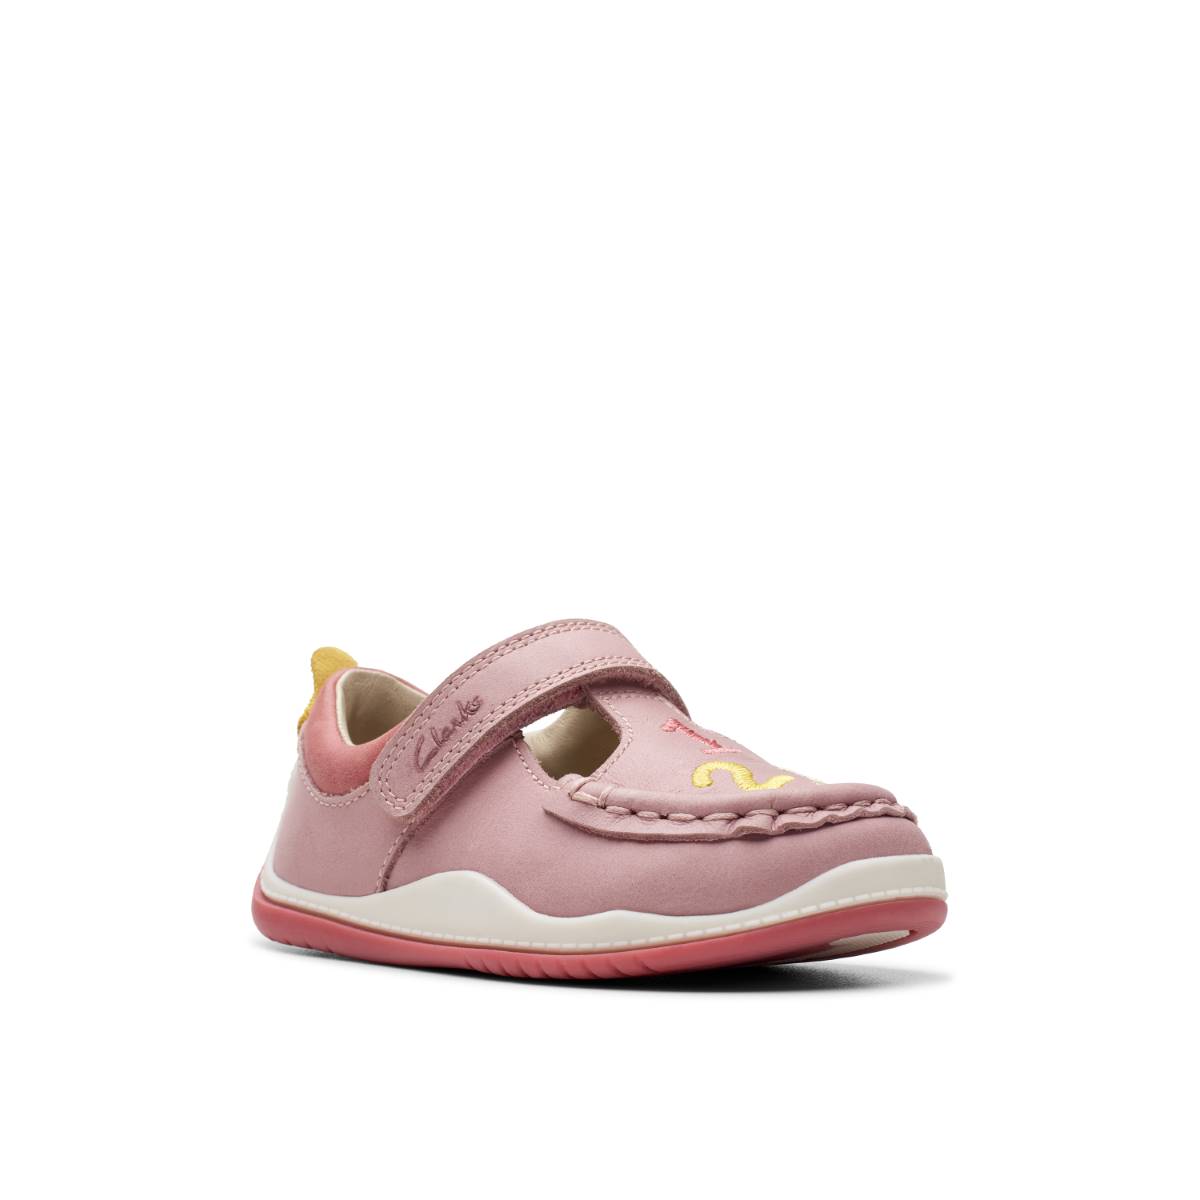 Clarks Noodleshine T Pink Leather Kids first shoes 7596-86F in a Plain Leather in Size 5